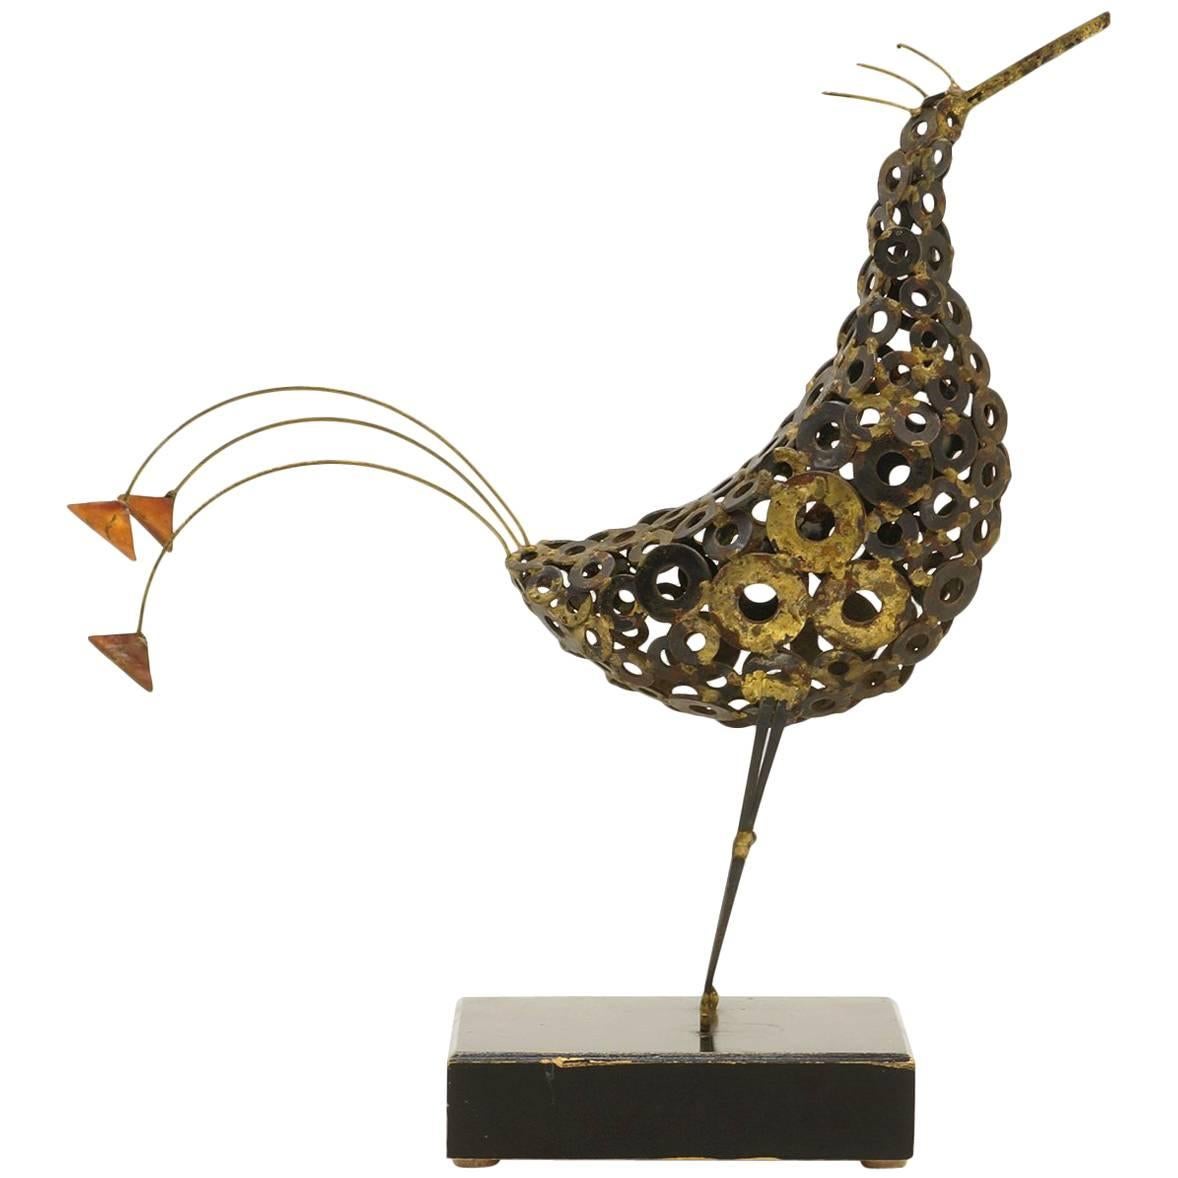 Tabletop Bird Sculpture in the Manner of Curtis Jere